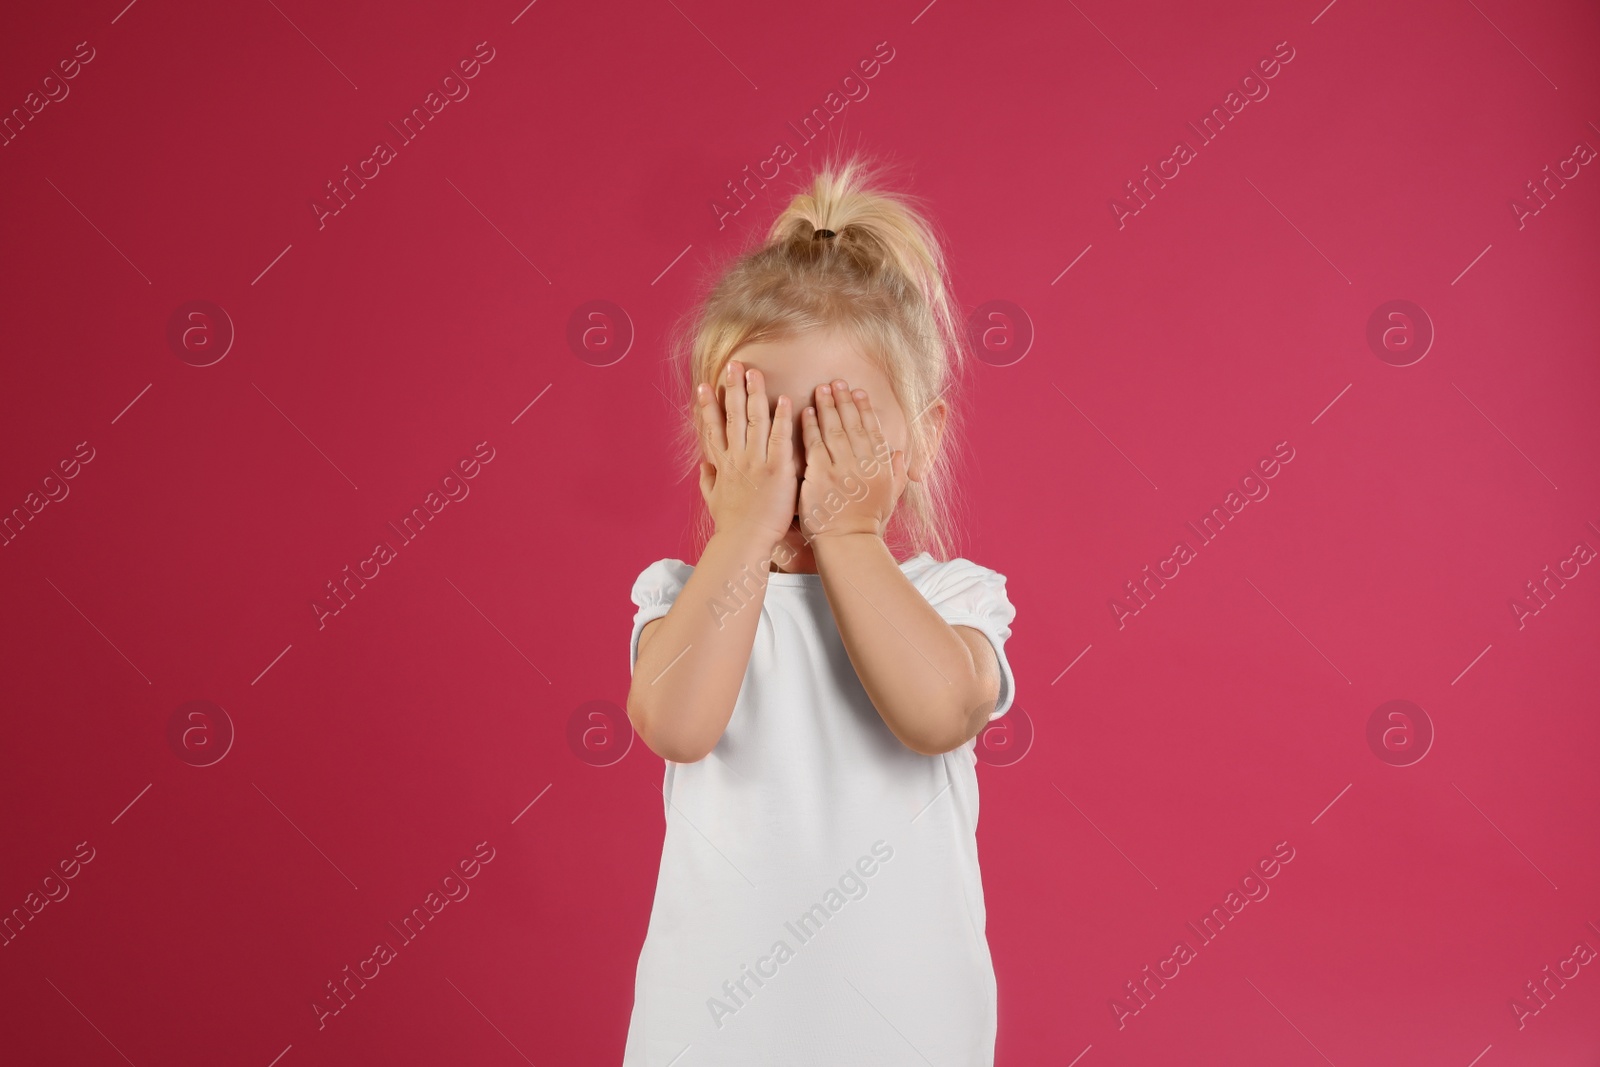 Photo of Cute little girl posing on pink background